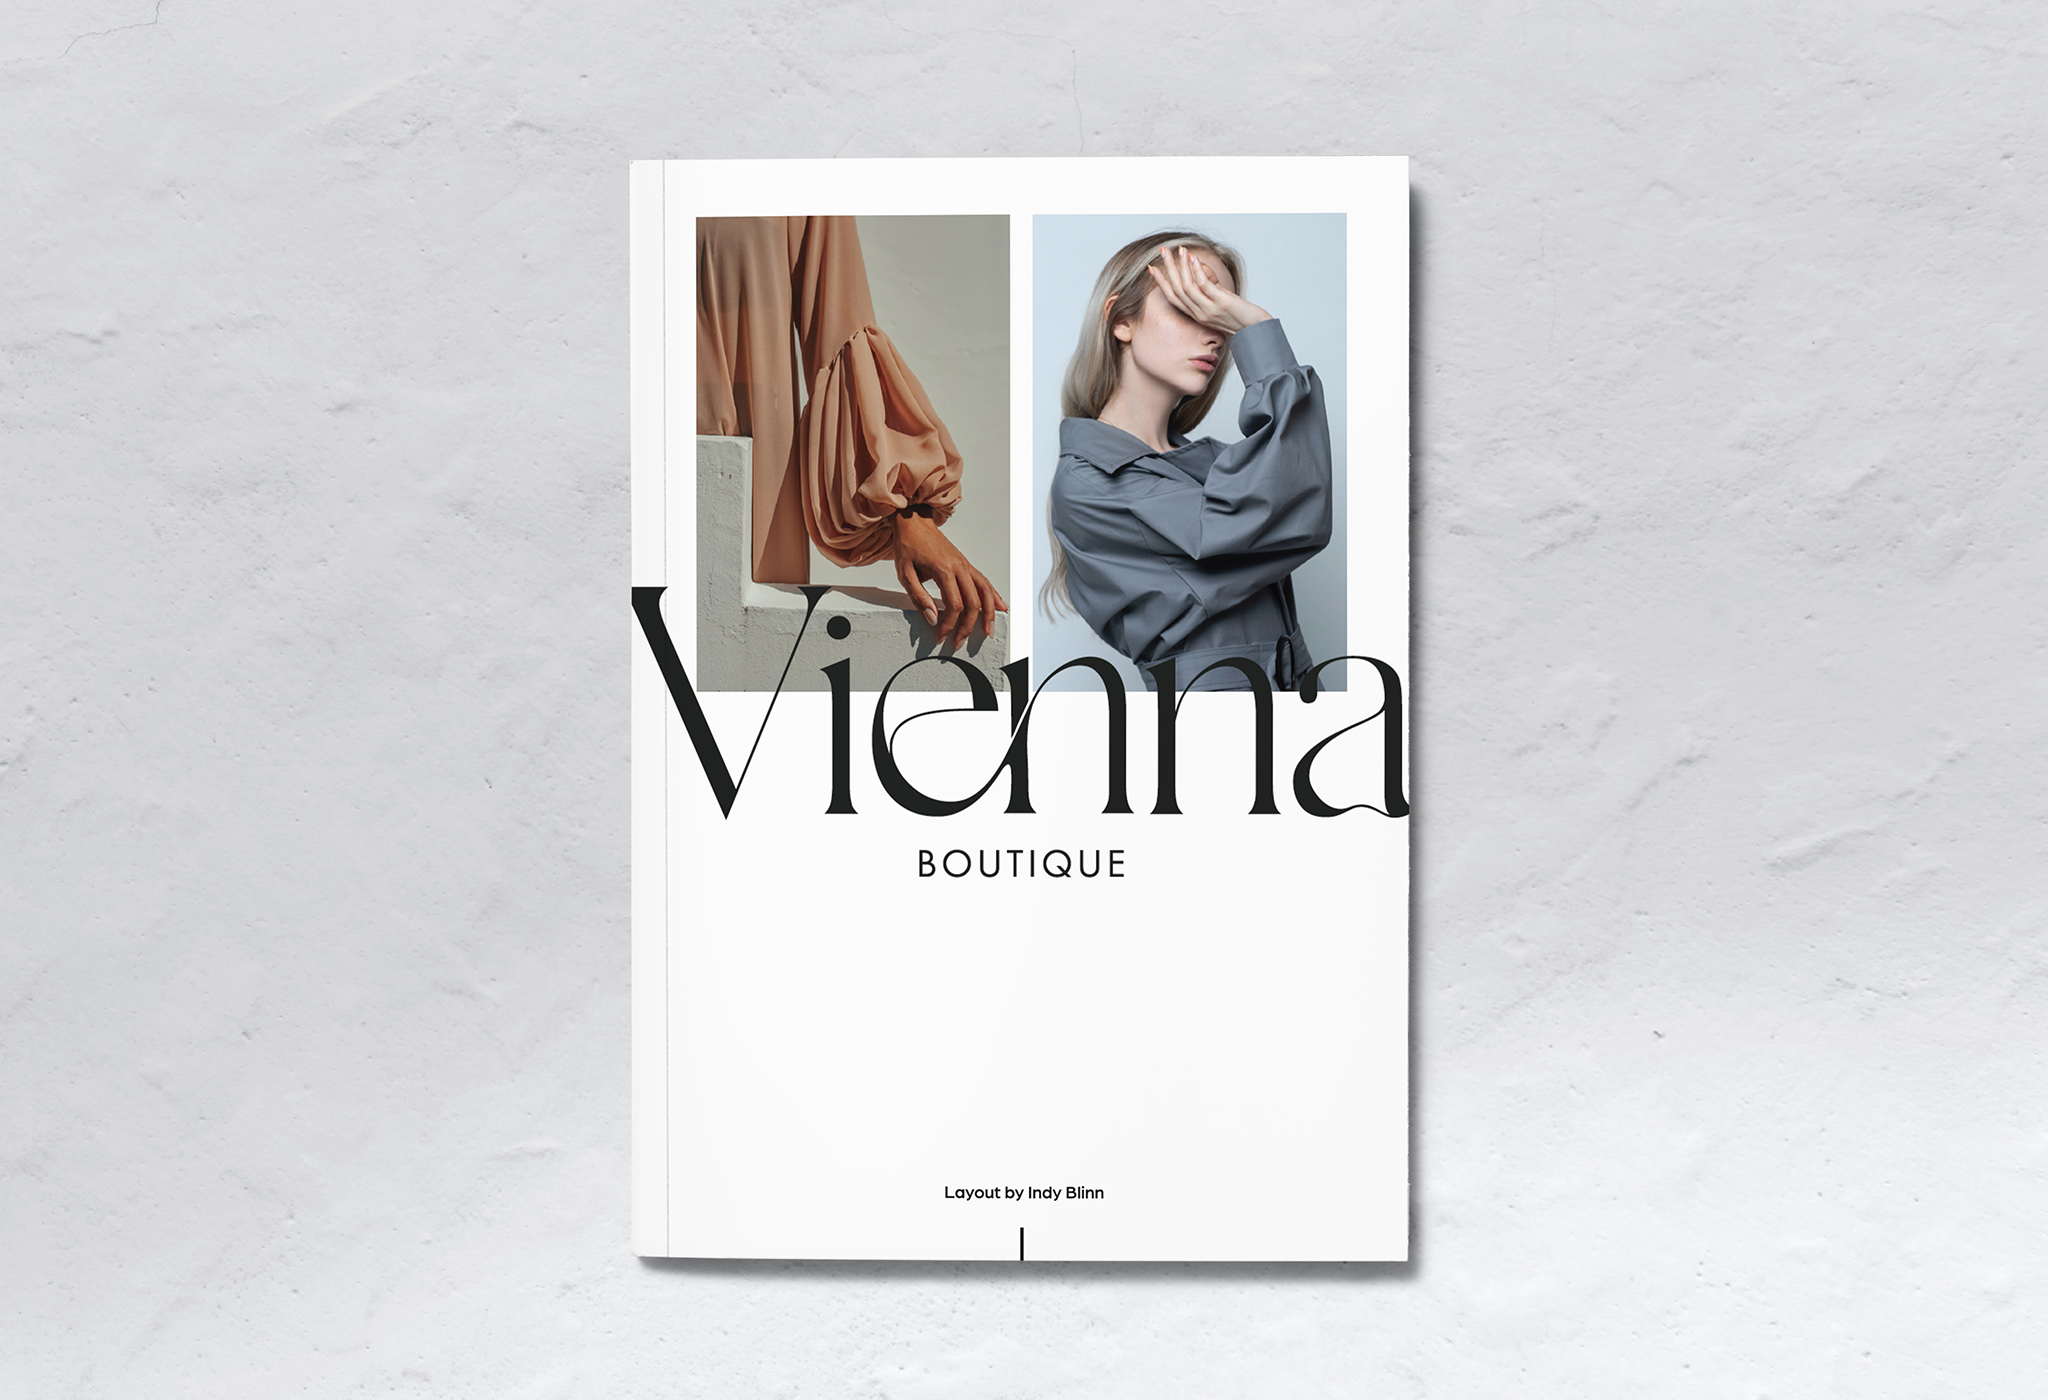 Mockup of a fashion magazine print design. The hypothetical business is titled Vienna Boutique